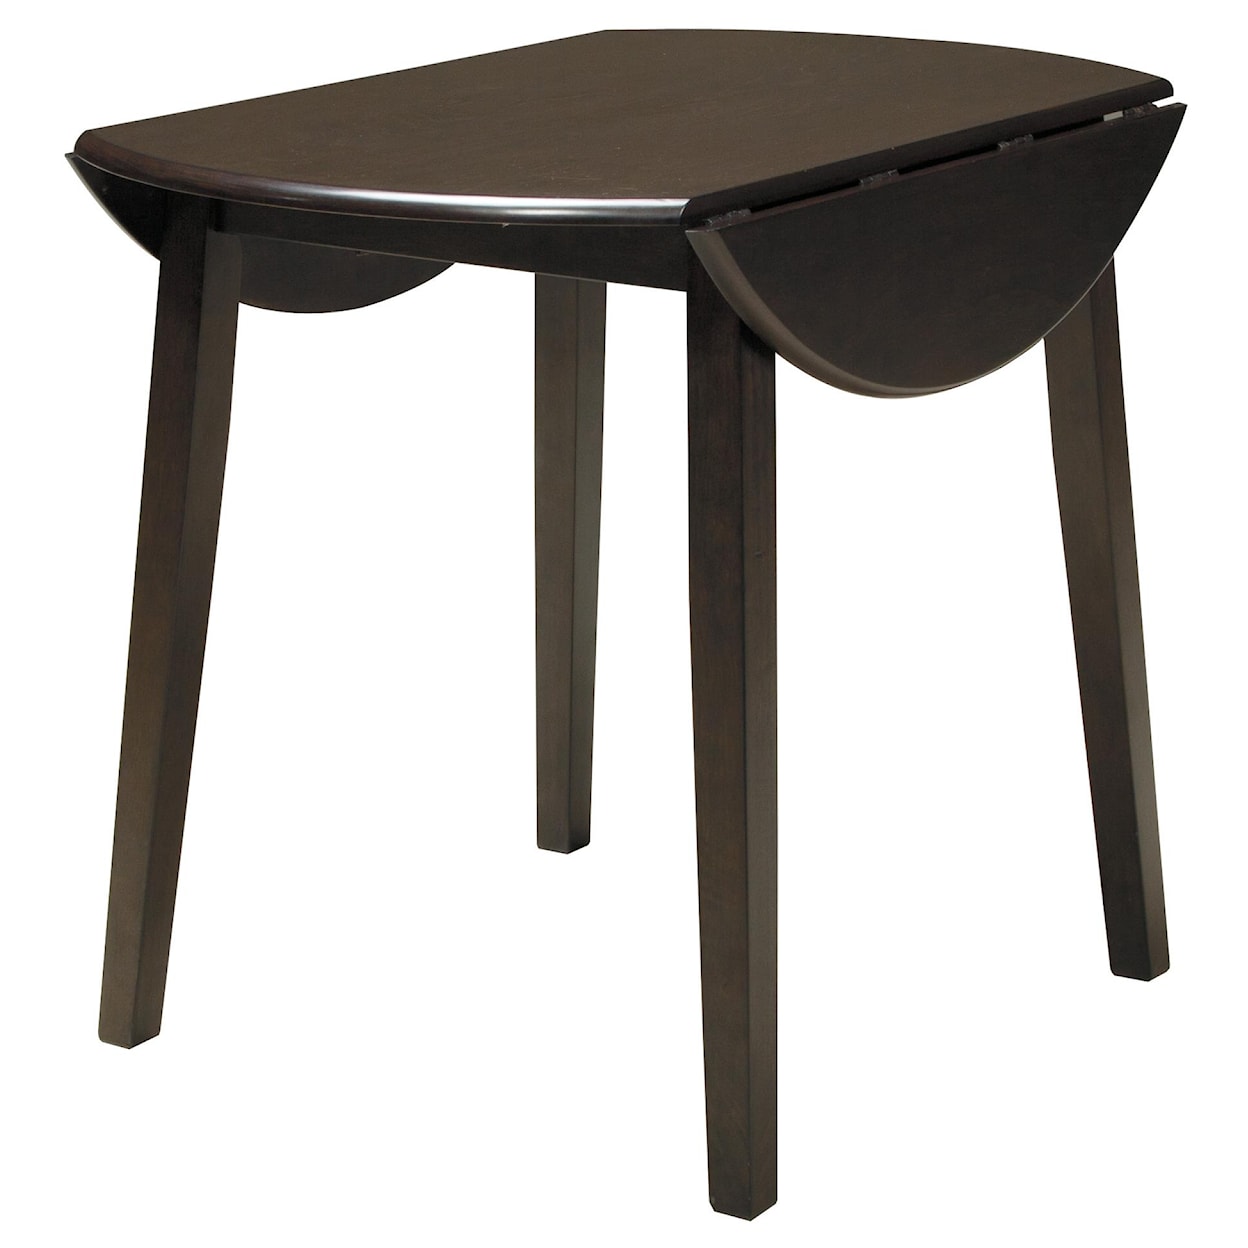 Signature Design by Ashley Griffin Drop-Leaf Dining Table